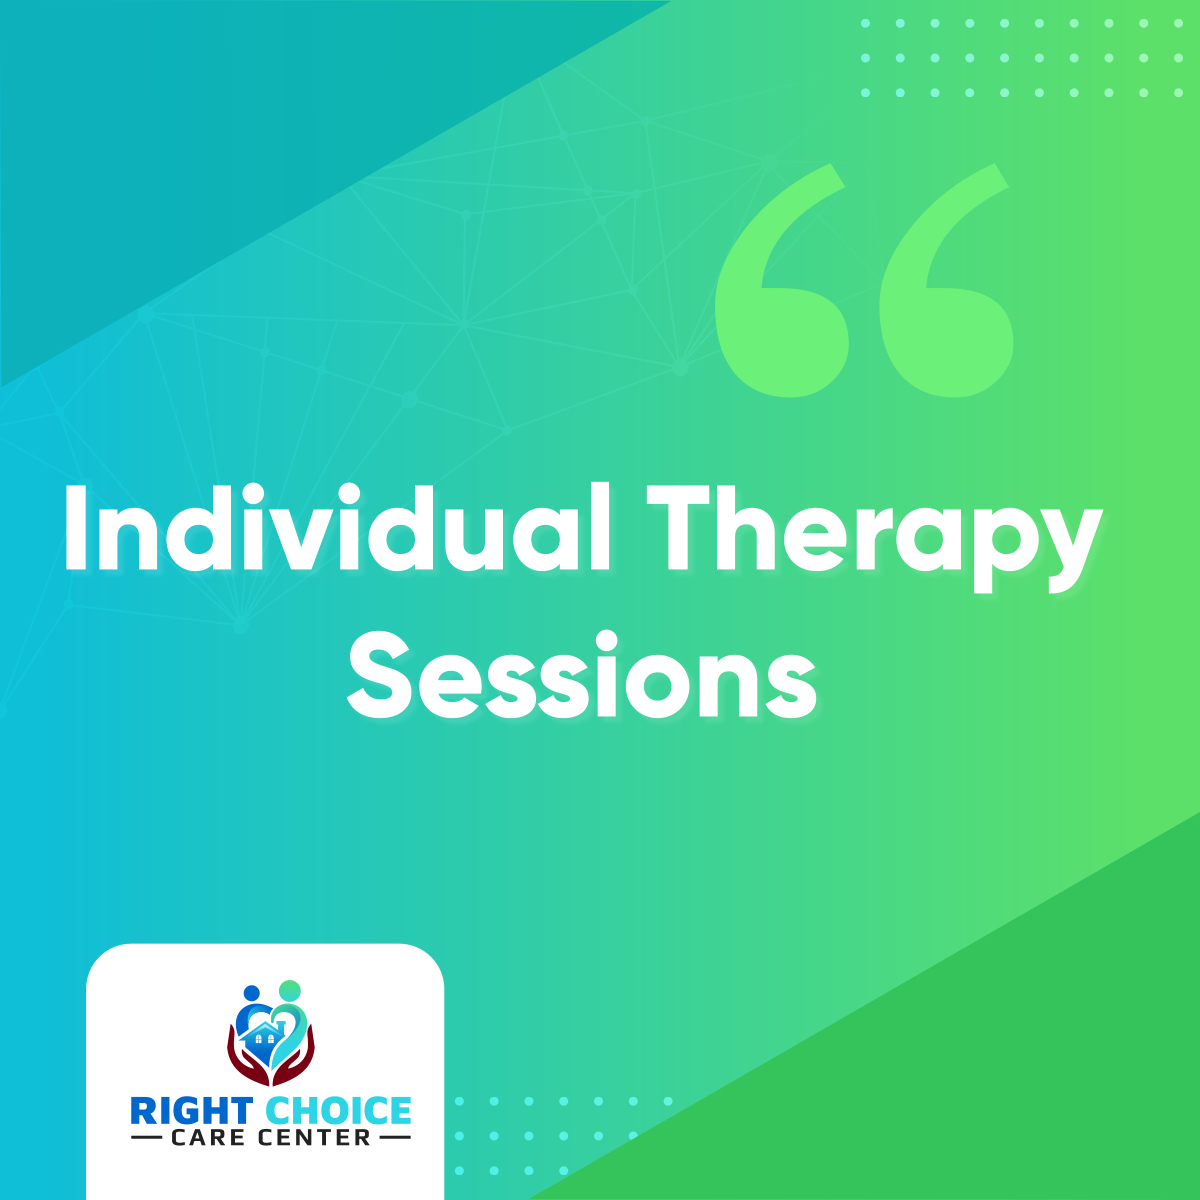 Having a proper treatment can make a world of difference in your recovery. That's why we offer individualized therapy sessions tailored to your specific needs, so you can get back to living your life. Please get in touch with us at (248) 481-6730.

#IndividualTherapy